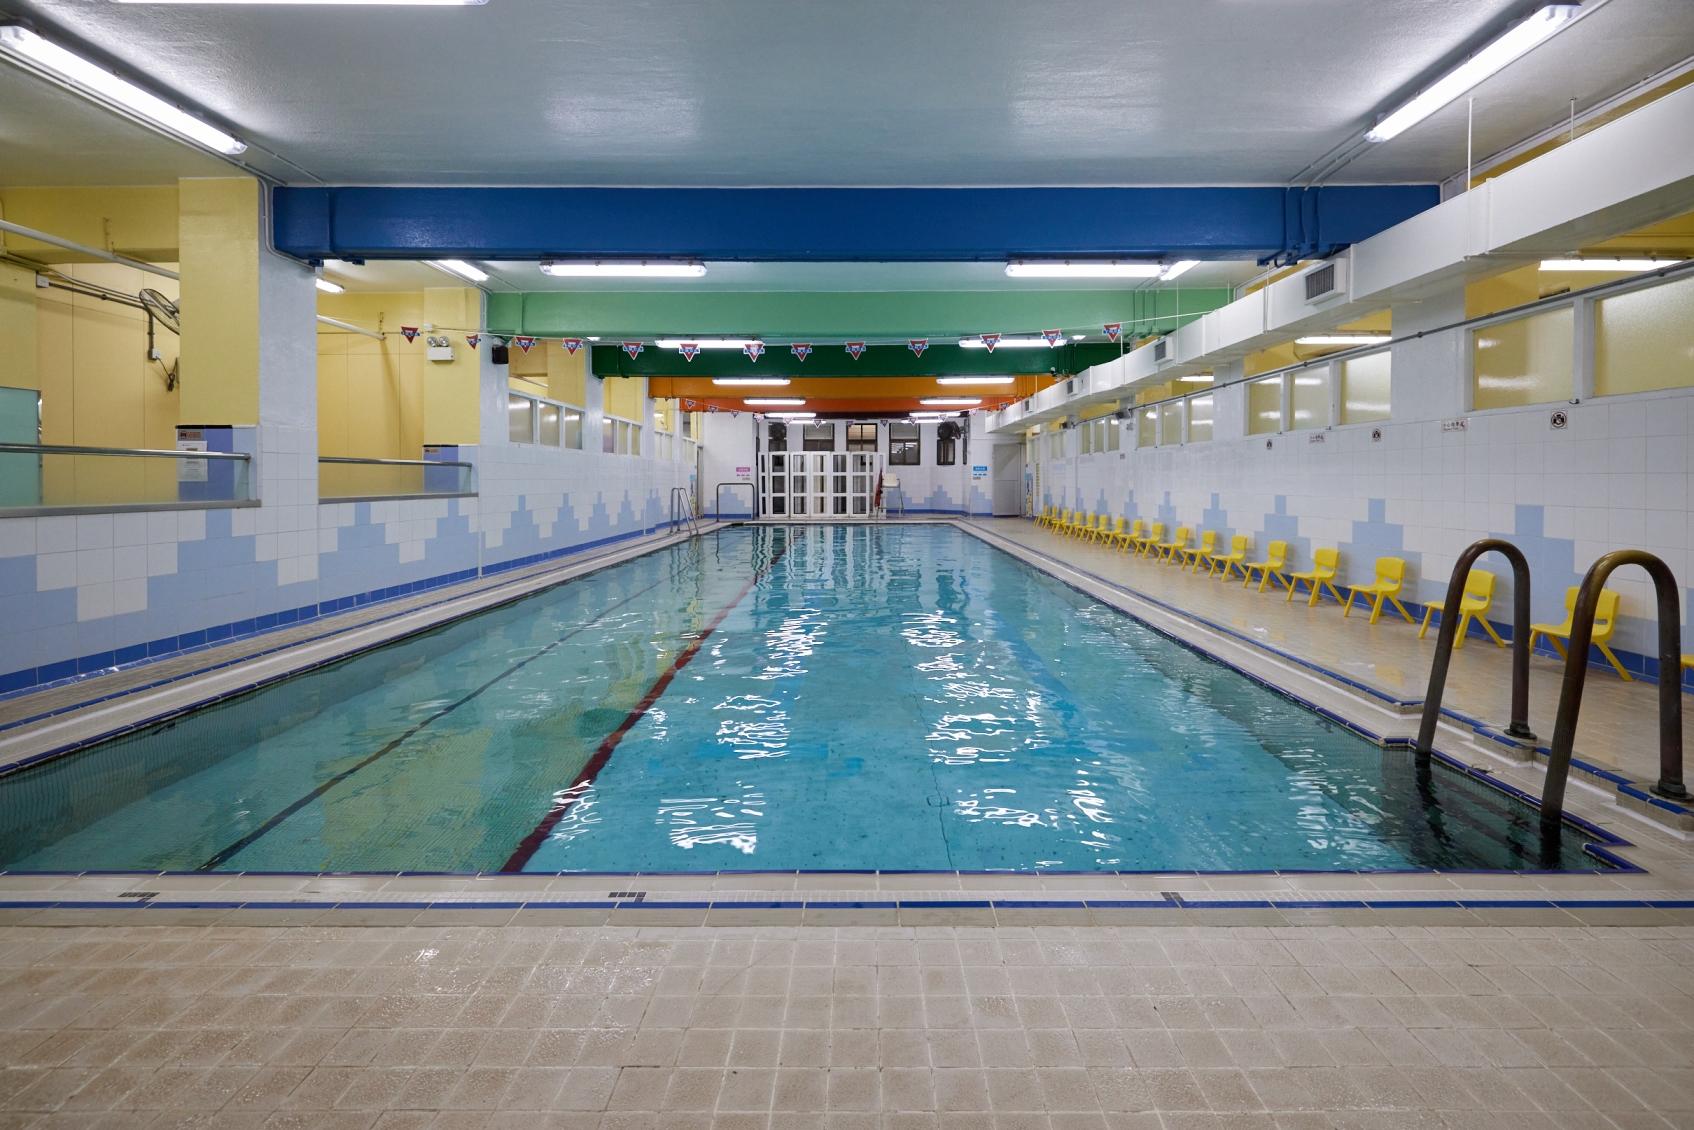 The Government gazetted today (October 20) the declaration of the Chinese YMCA of Hong Kong in Sheung Wan as a monument under the Antiquities and Monuments Ordinance. Photo shows the indoor swimming pool in the Chinese YMCA of Hong Kong. The original brass rail is still in use.